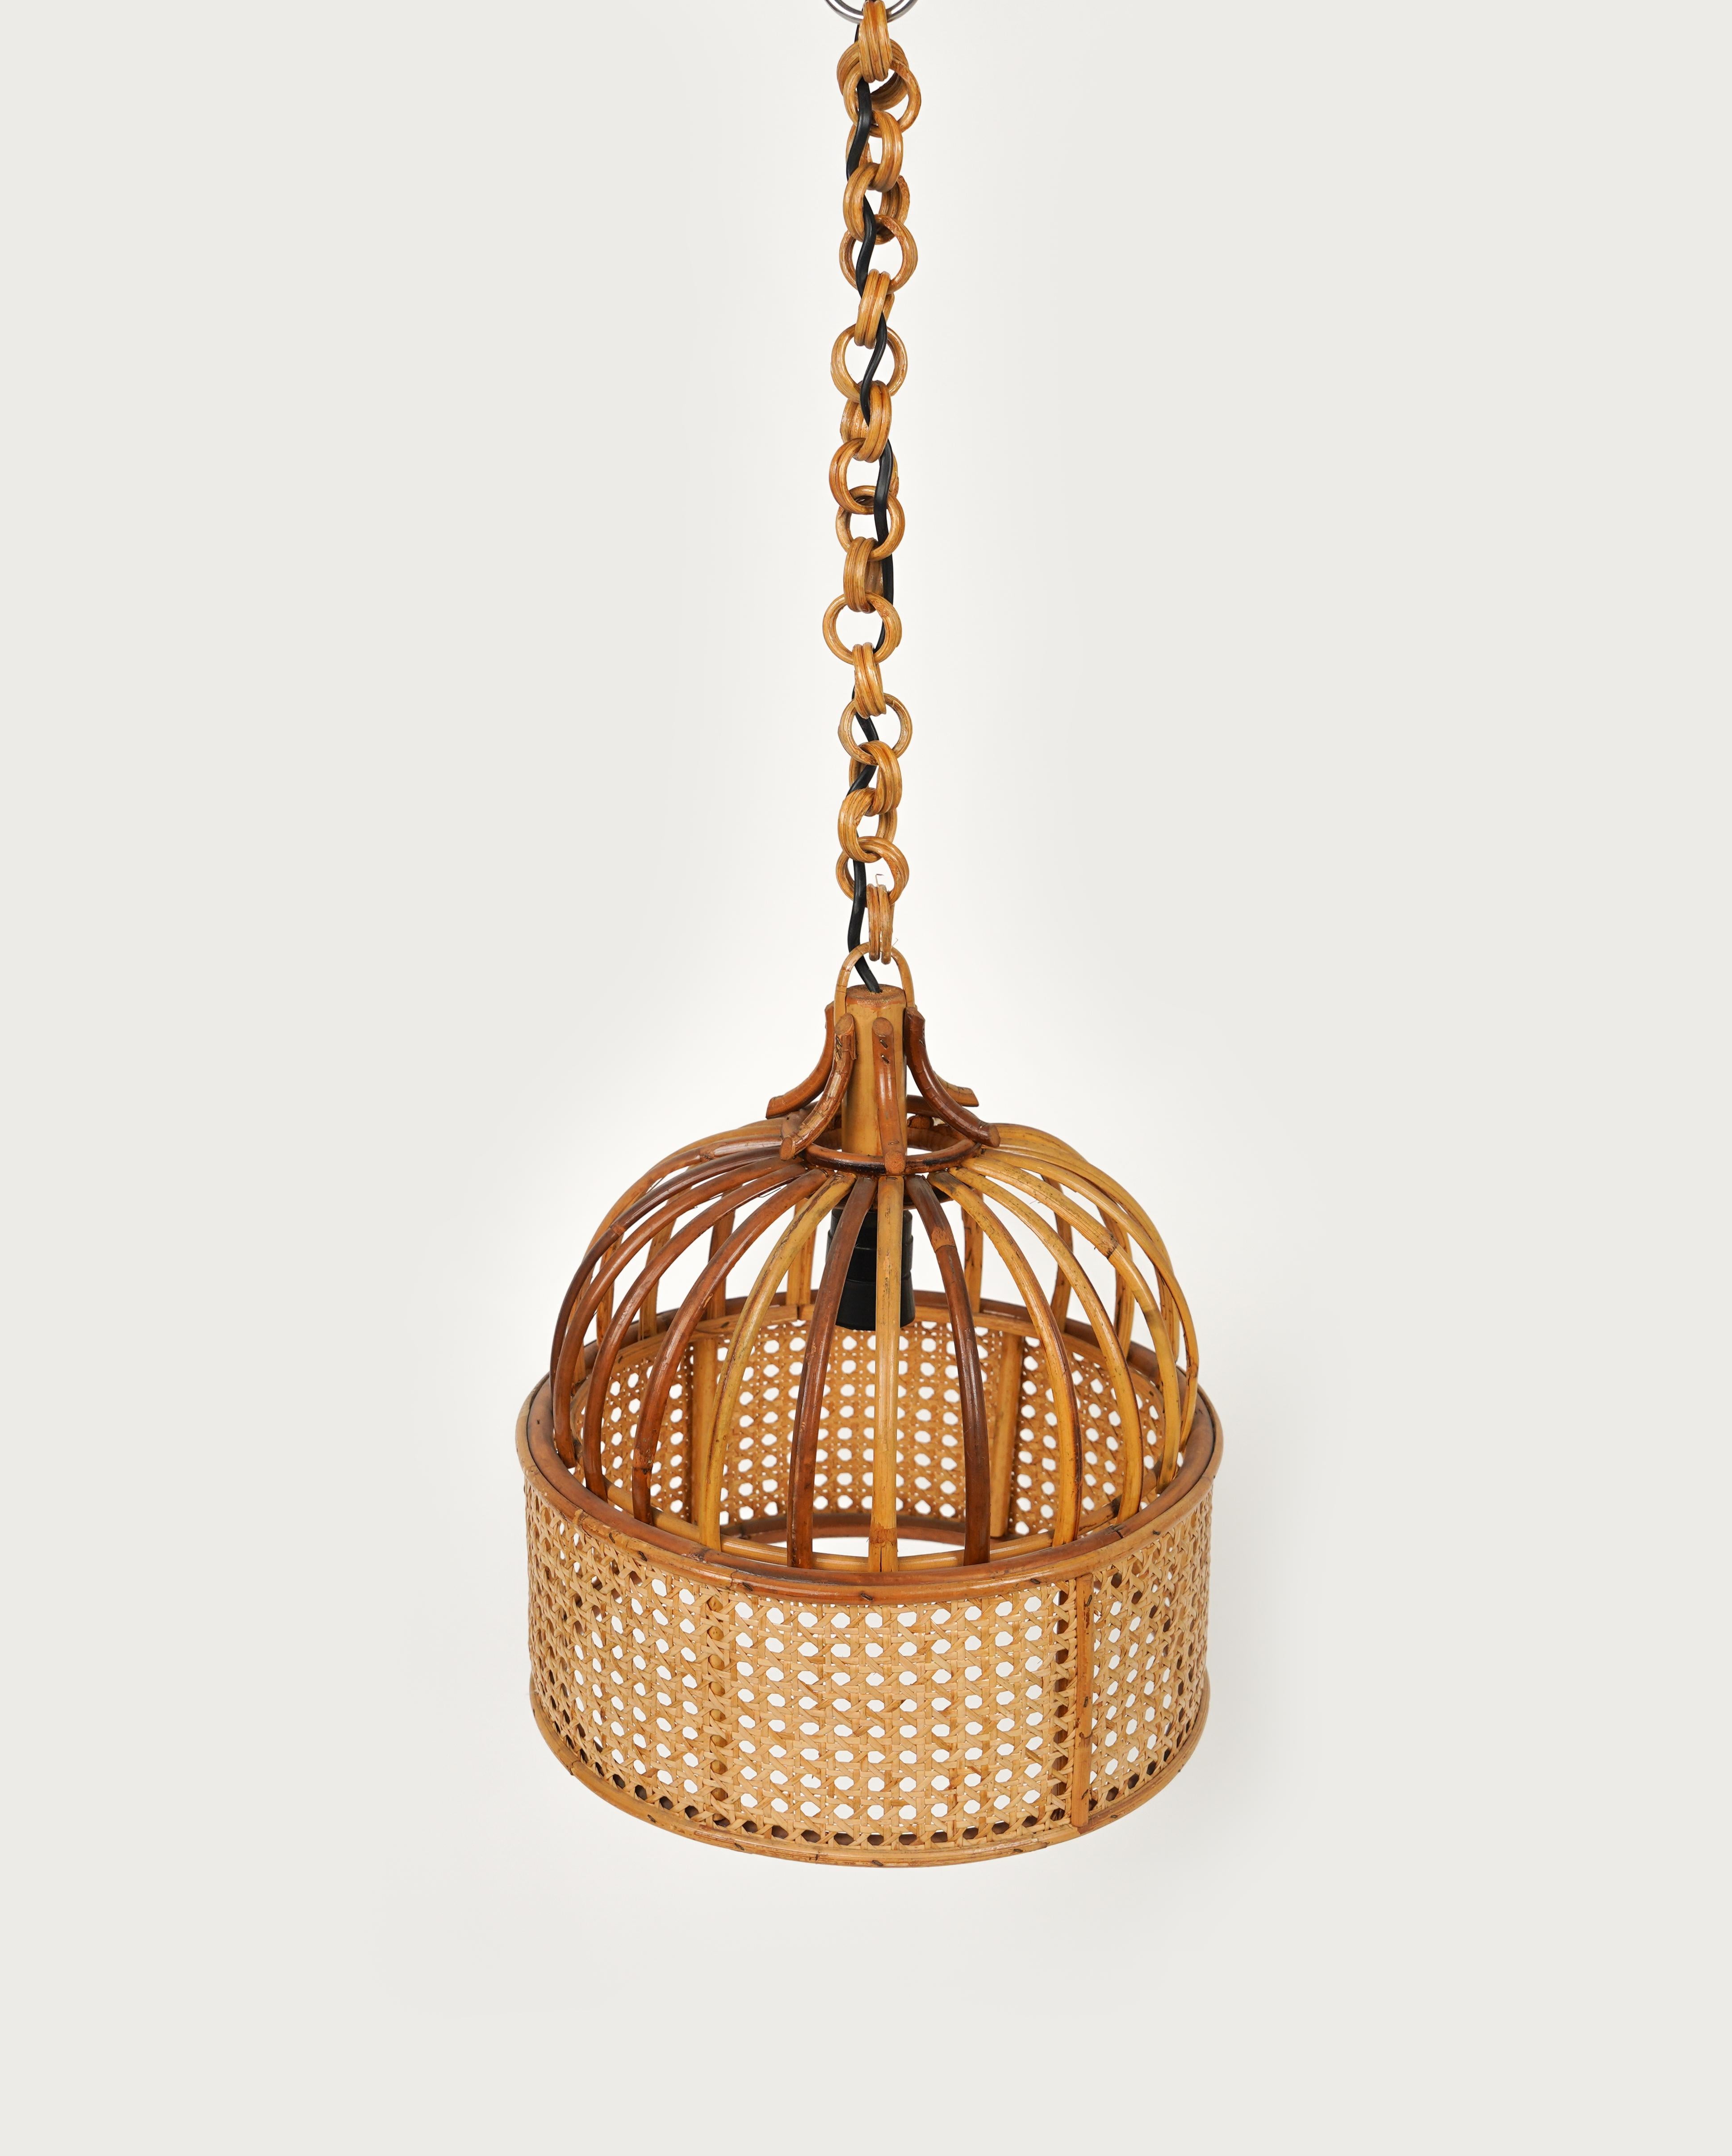 Midcentury French Riviera Rattan and Wicker Chandelier, Italy 1970s For Sale 6